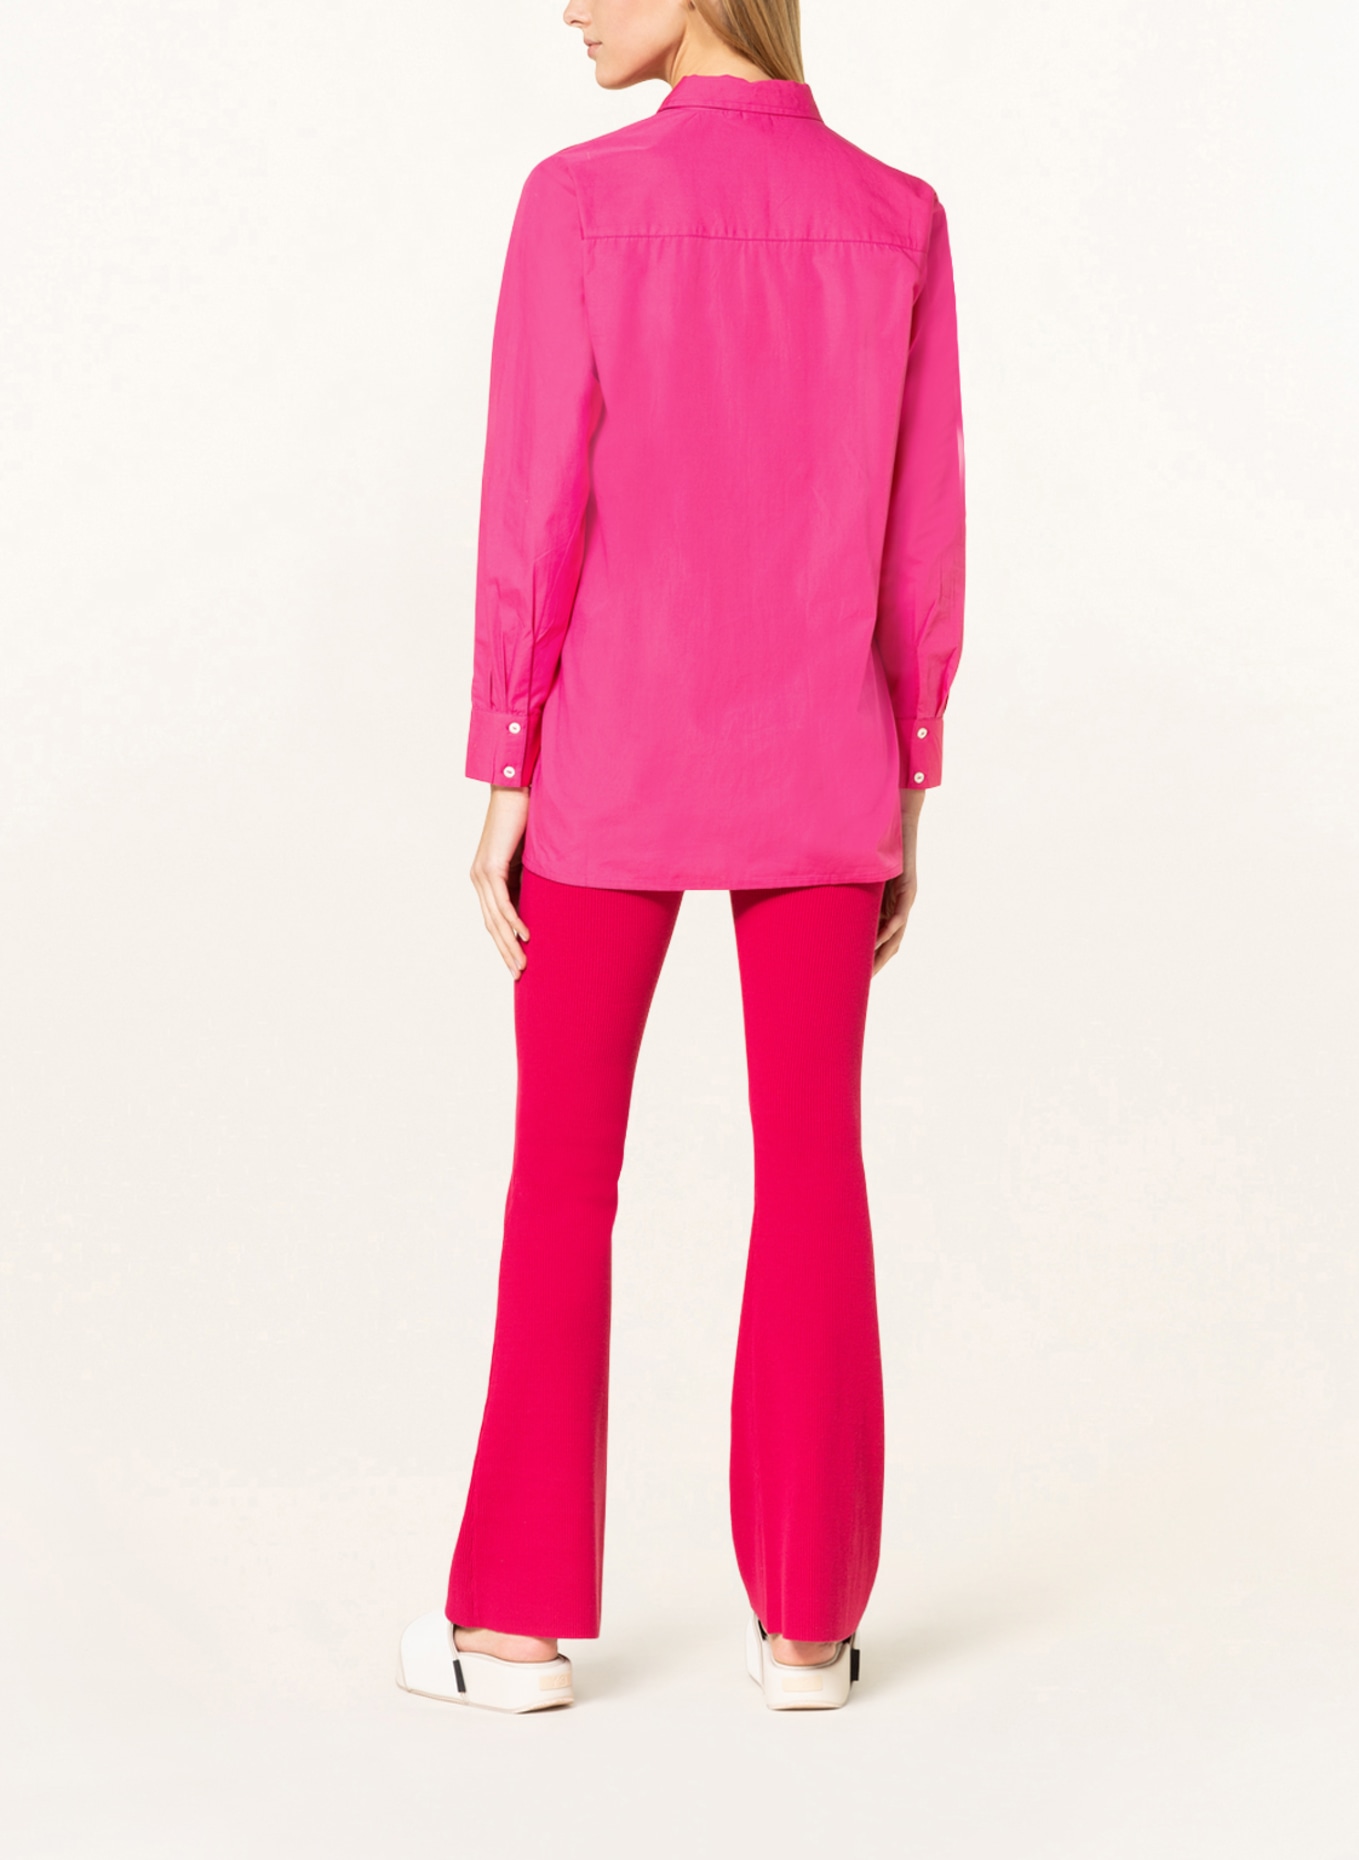 ONLY Shirt blouse, Color: PINK (Image 3)